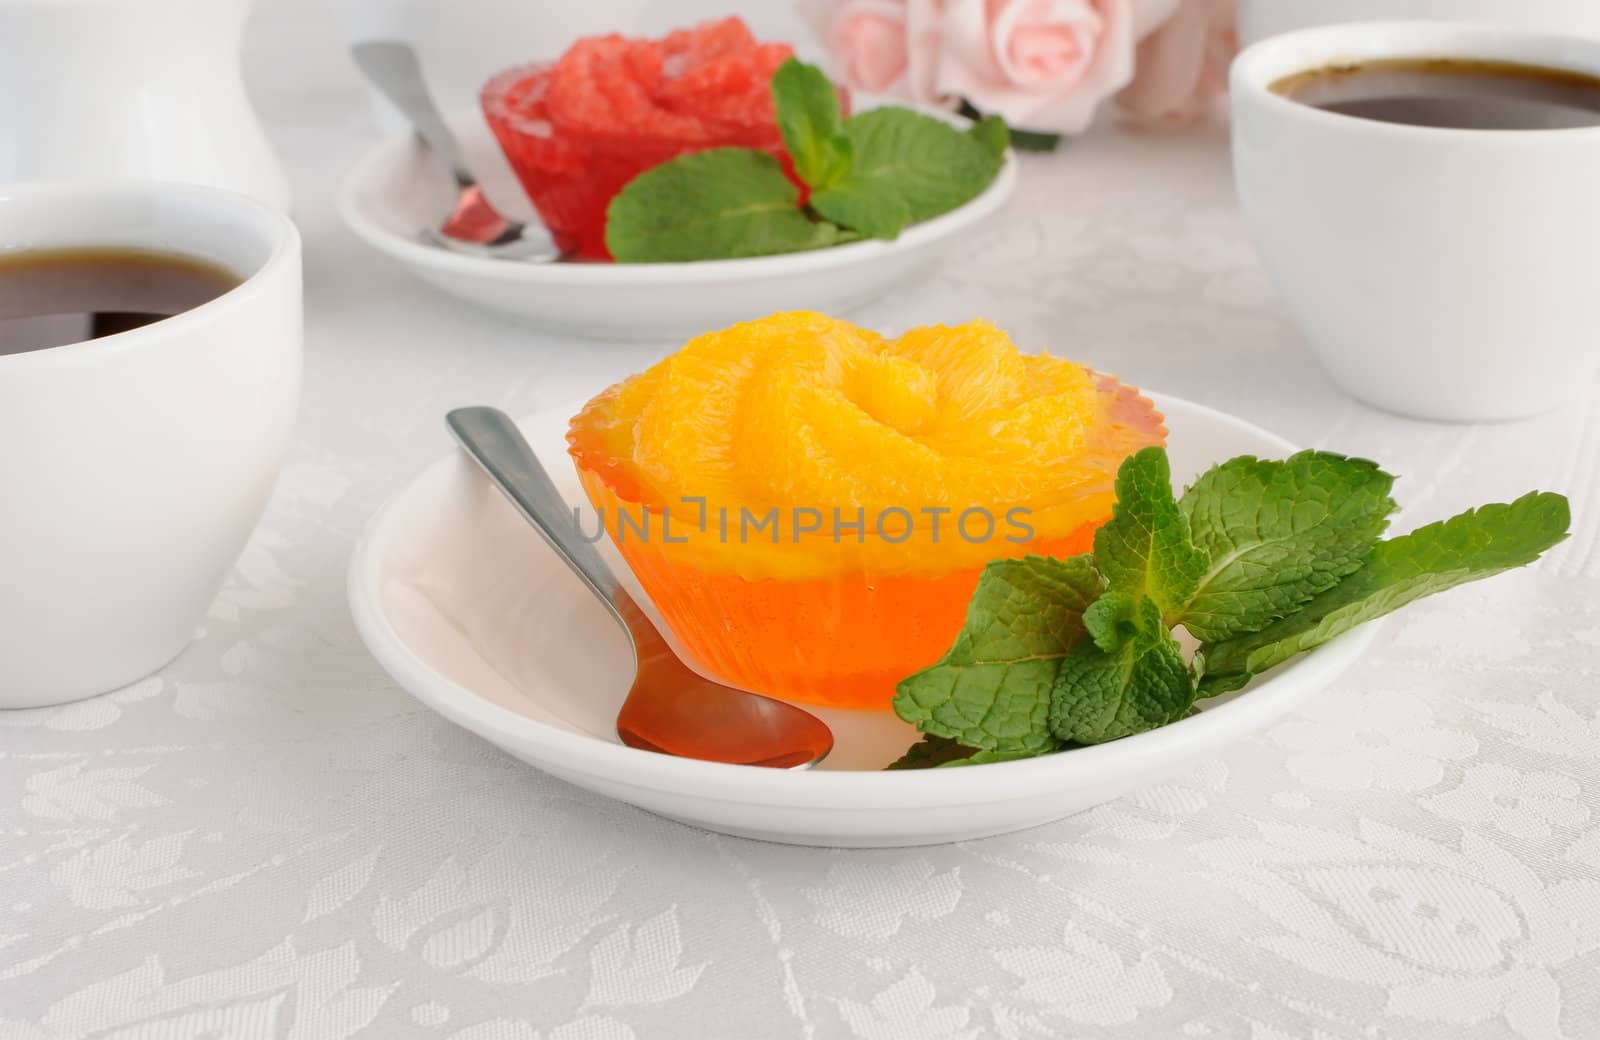 A cup of coffee and orange jelly with slices of fresh orange by Apolonia